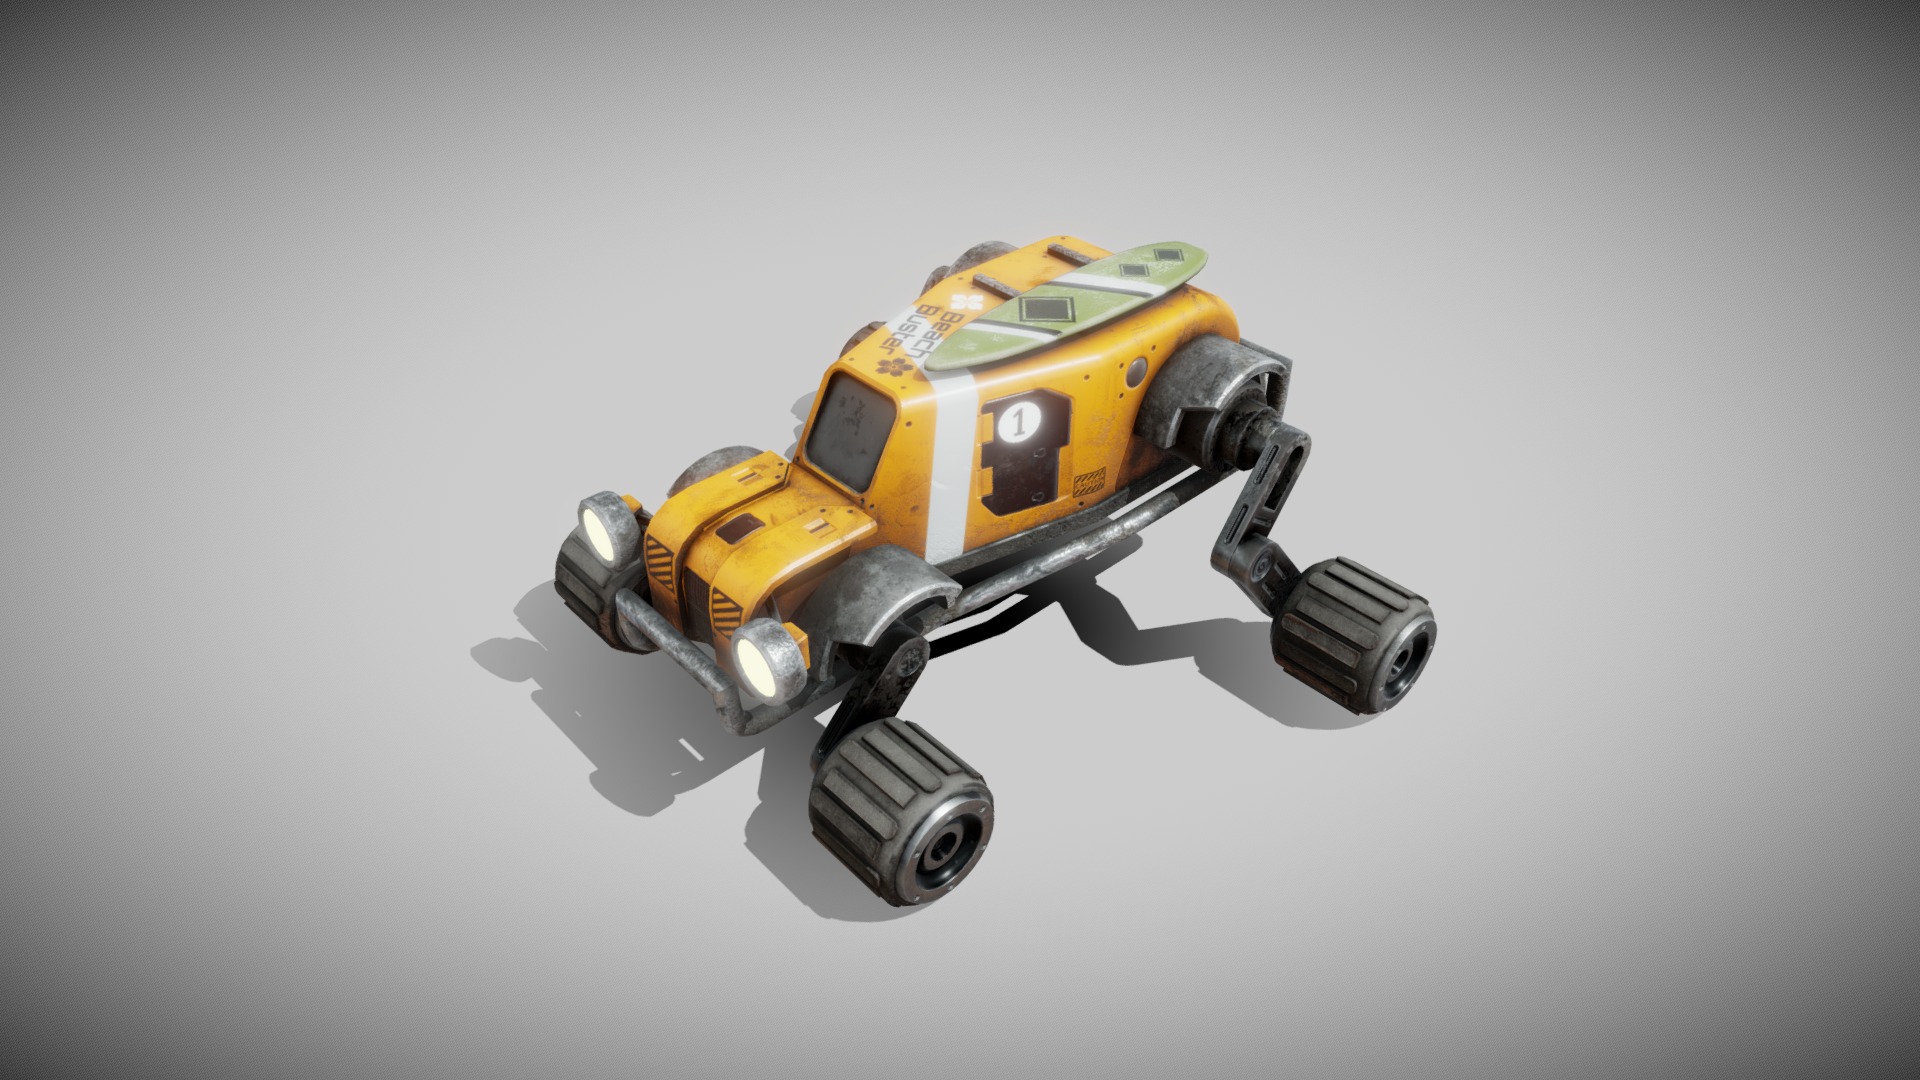 3D model Future Dune Buggy - This is a 3D model of the Future Dune Buggy. The 3D model is about a toy car on a white surface.